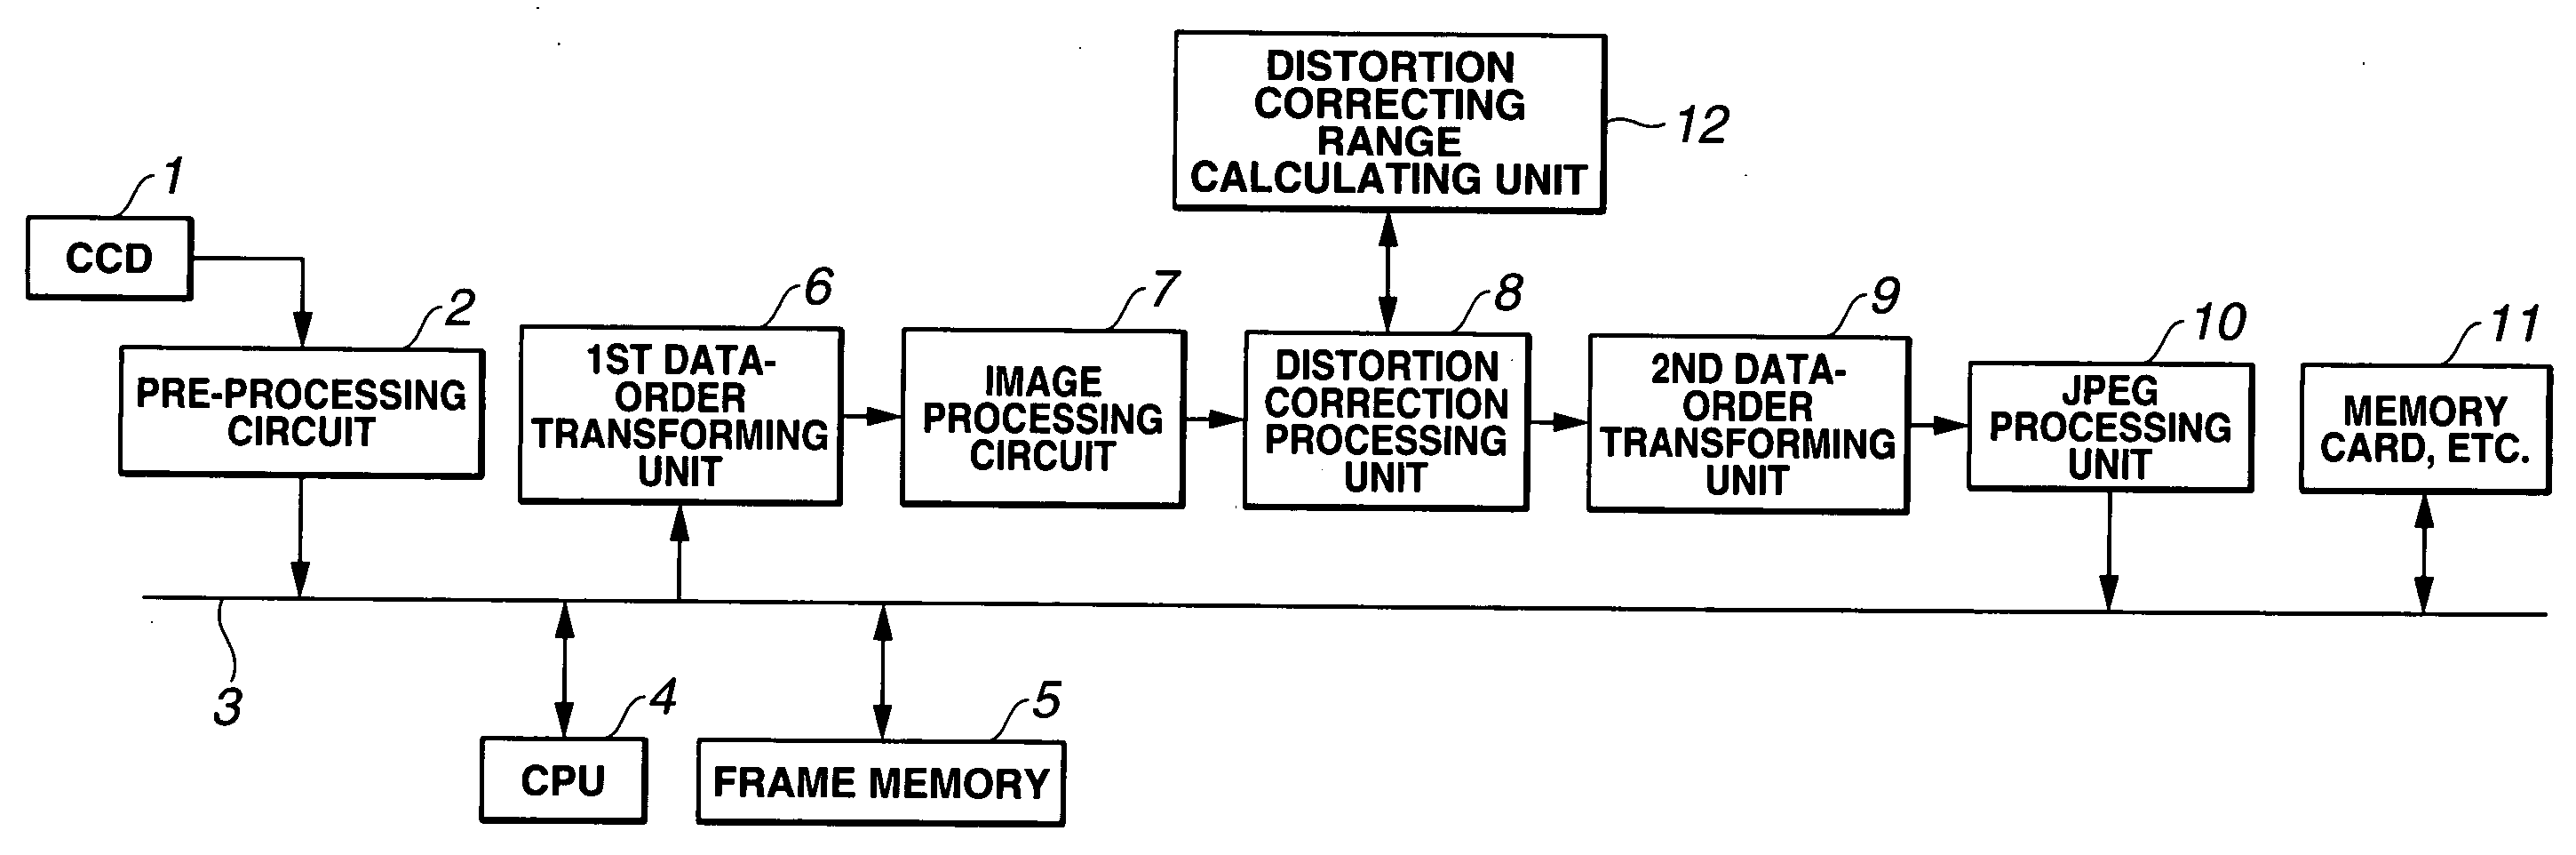 Image processing apparatus, image processing method, and distortion correcting method